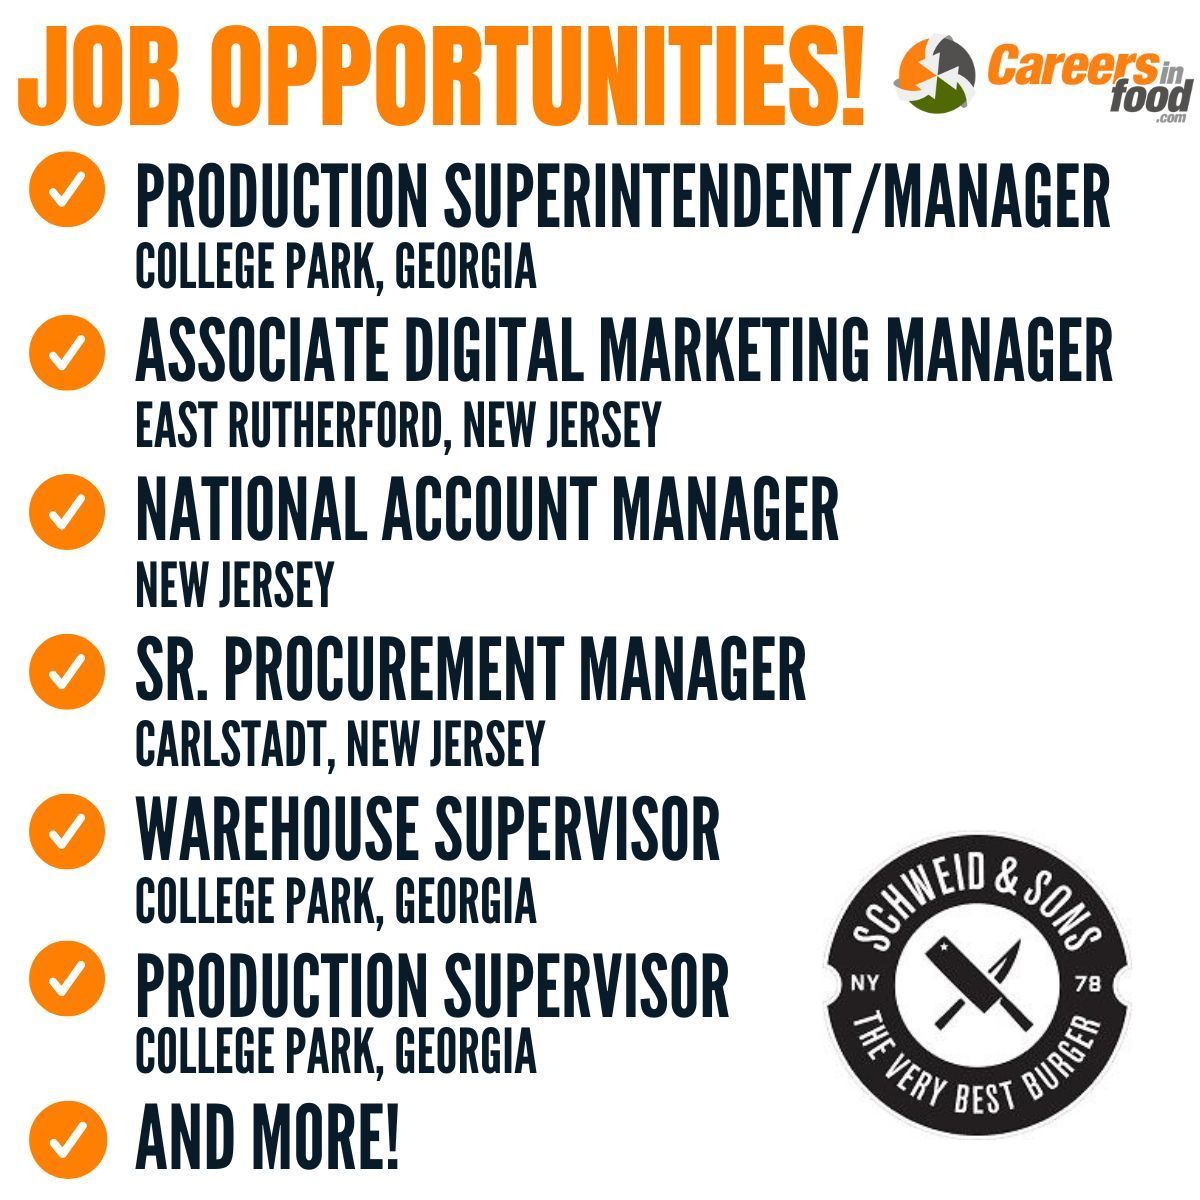 Join the team at @SchweidAndSons!

The company is hiring a Production Supervisor, Associate Digital Marketing Manager, Sr. Procurement Manager, National Account Manager, and more.

Apply here: careersinfood.com/schweid-and-so…

#Jobs #FoodProduction #MarketingJobs #ManagementJobs #ApplyNow